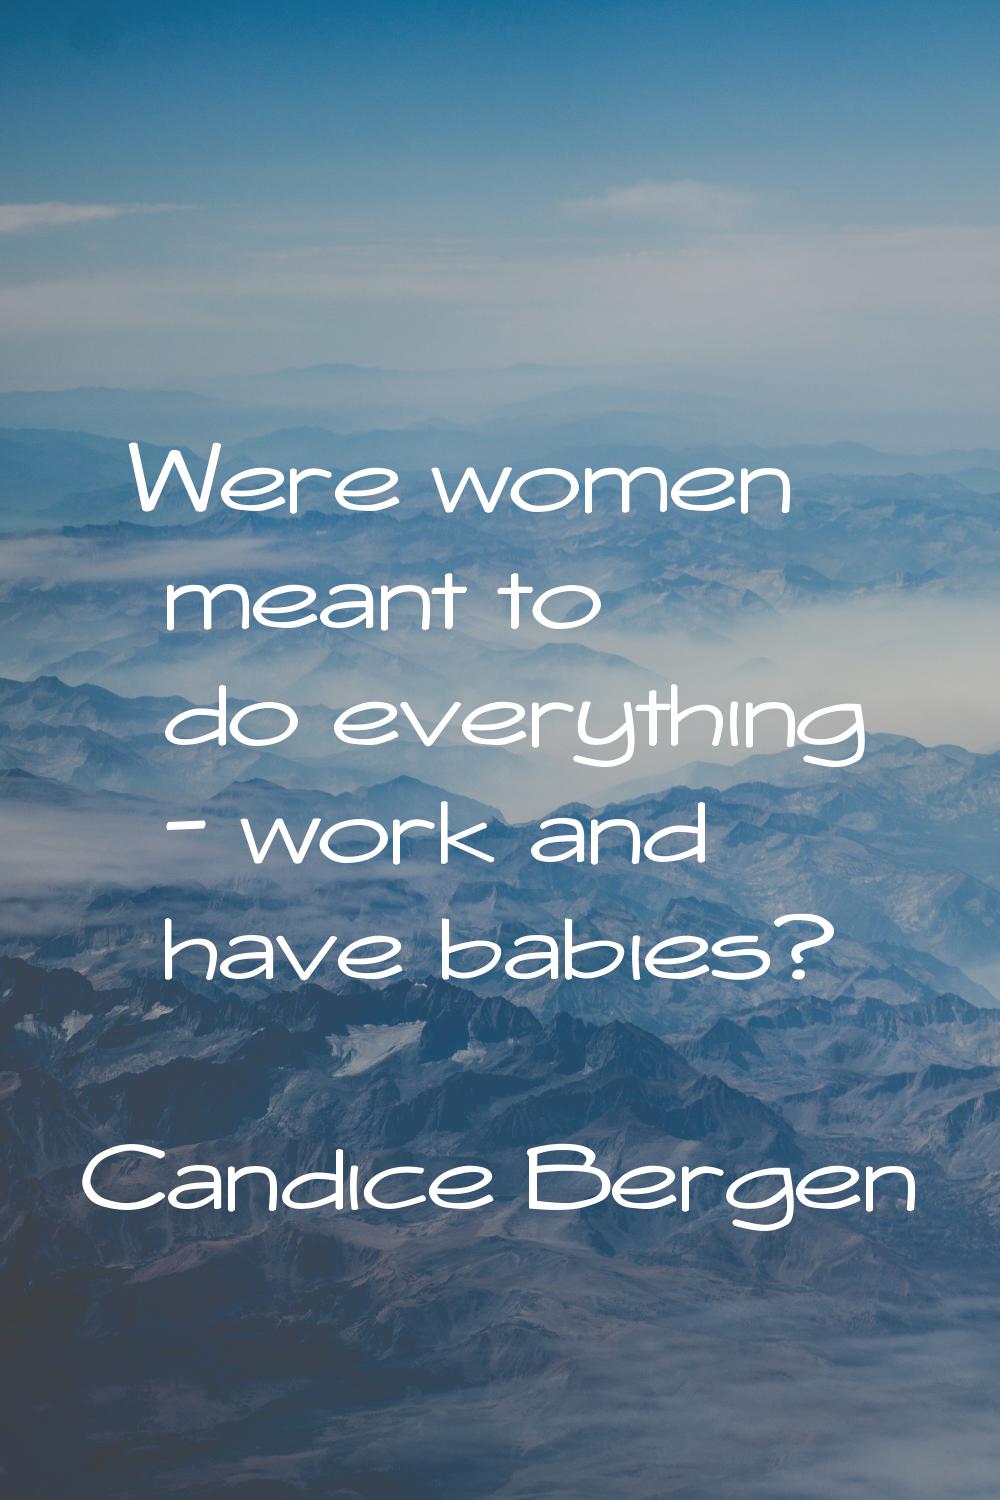 Were women meant to do everything - work and have babies?